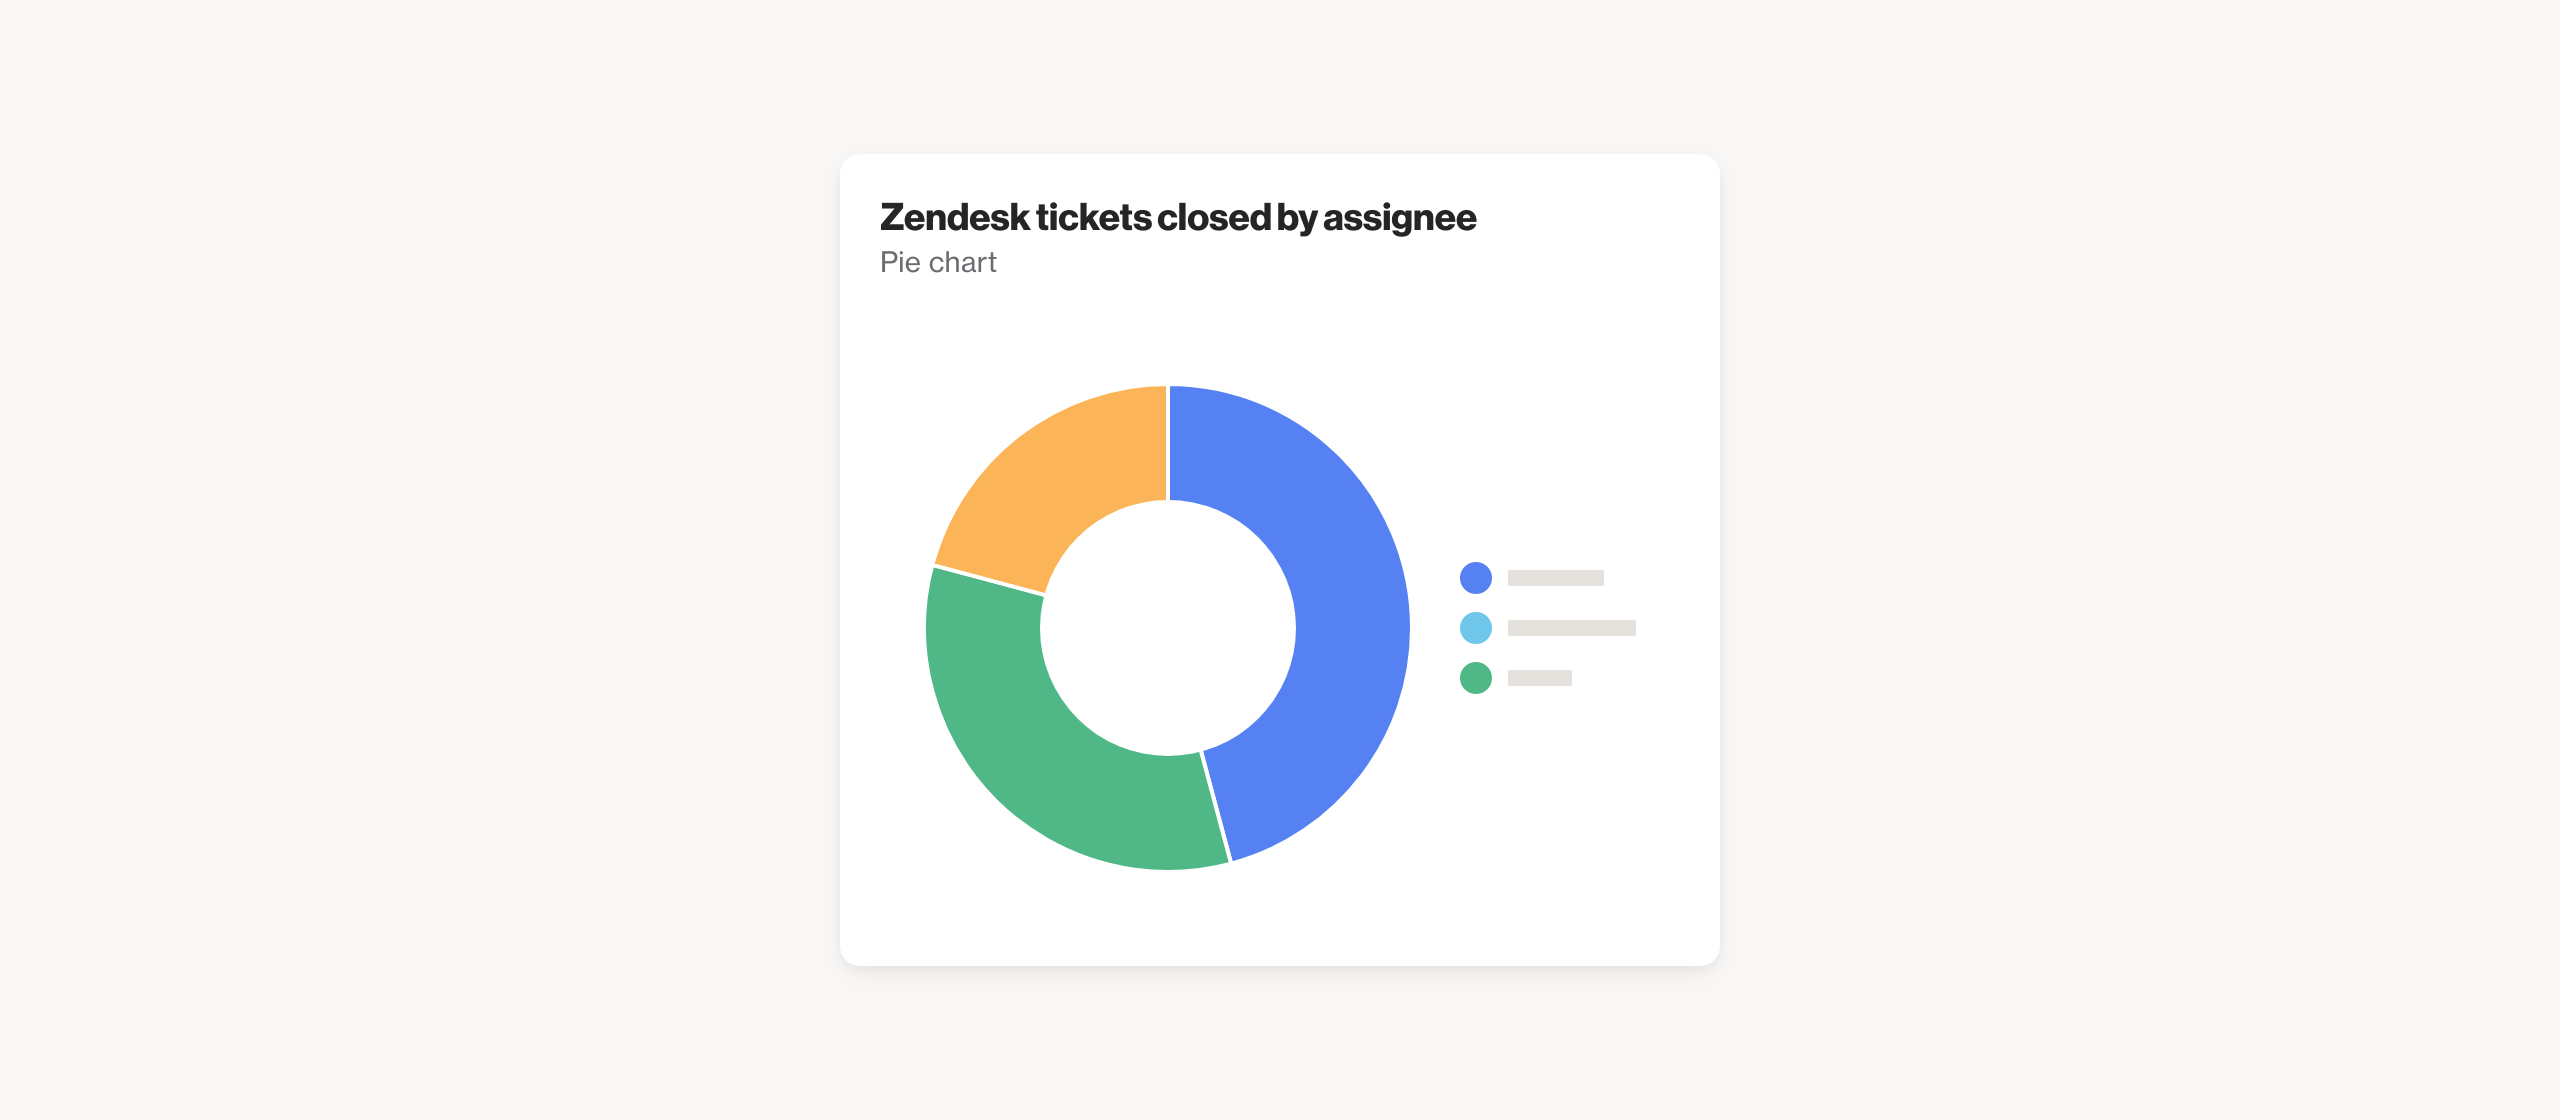 Zendesk tickets closed by assignee